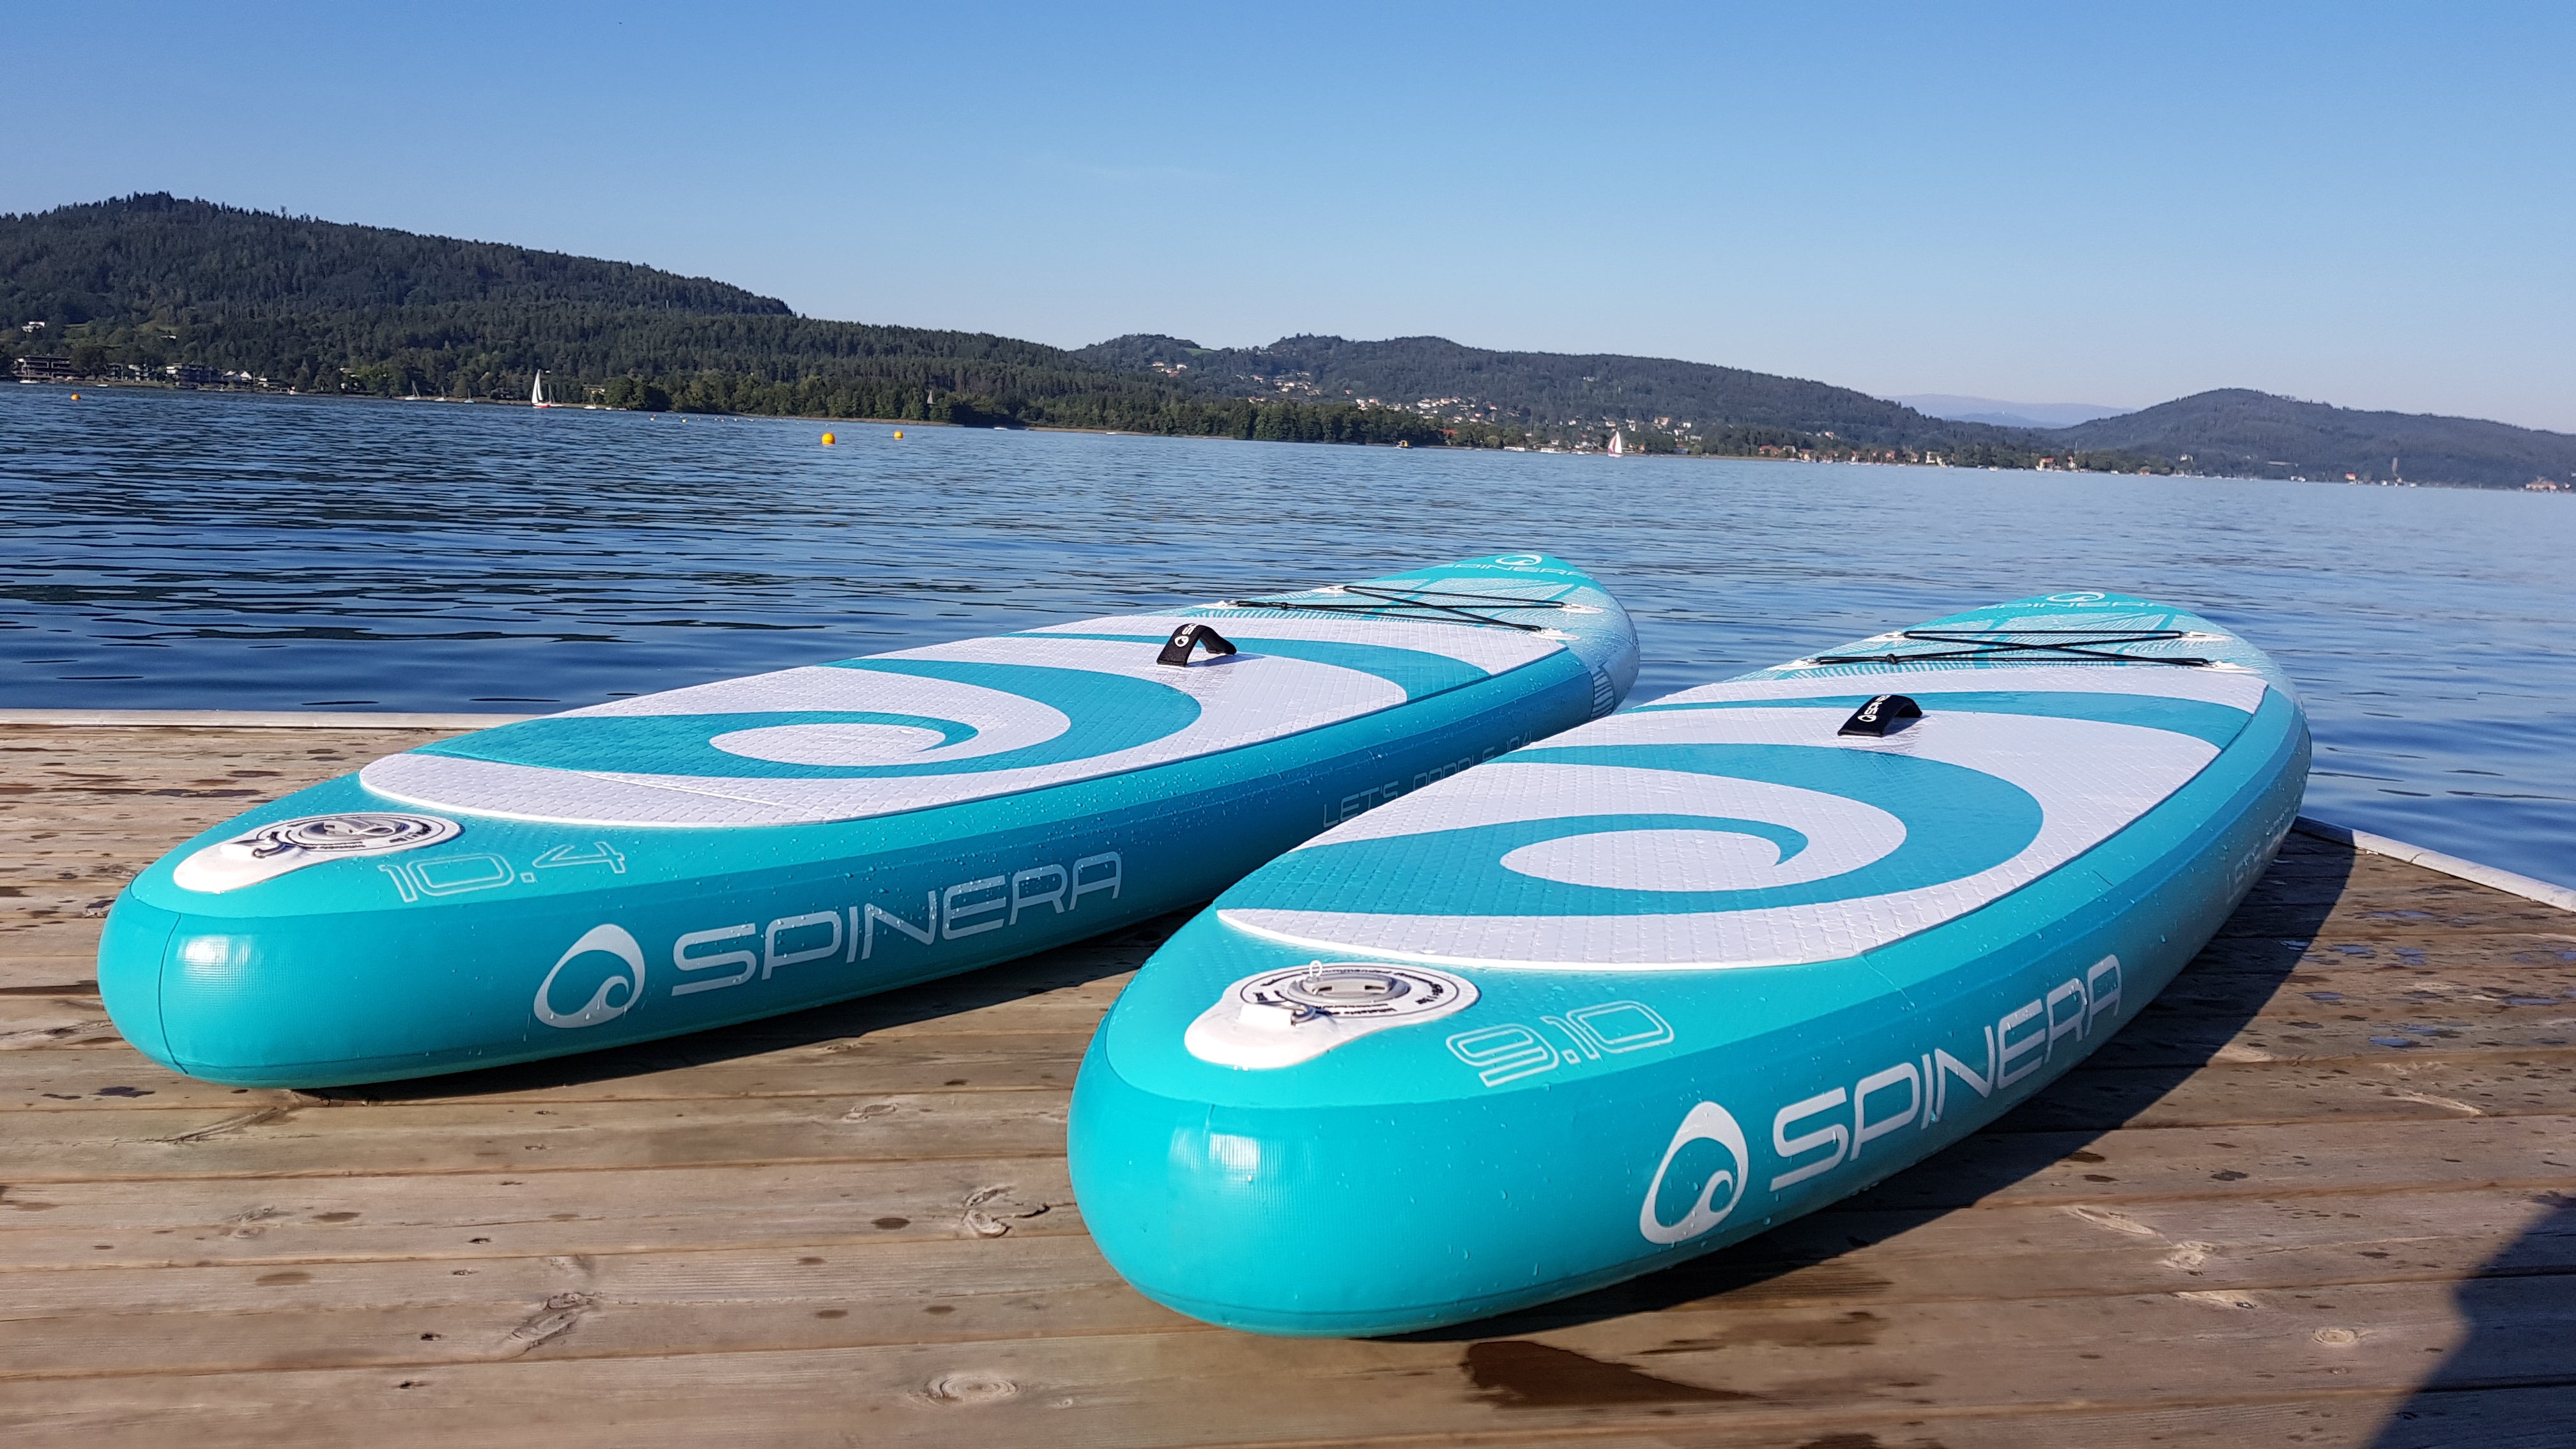 Spinera Let's Paddle iSUP - 4 sizes available